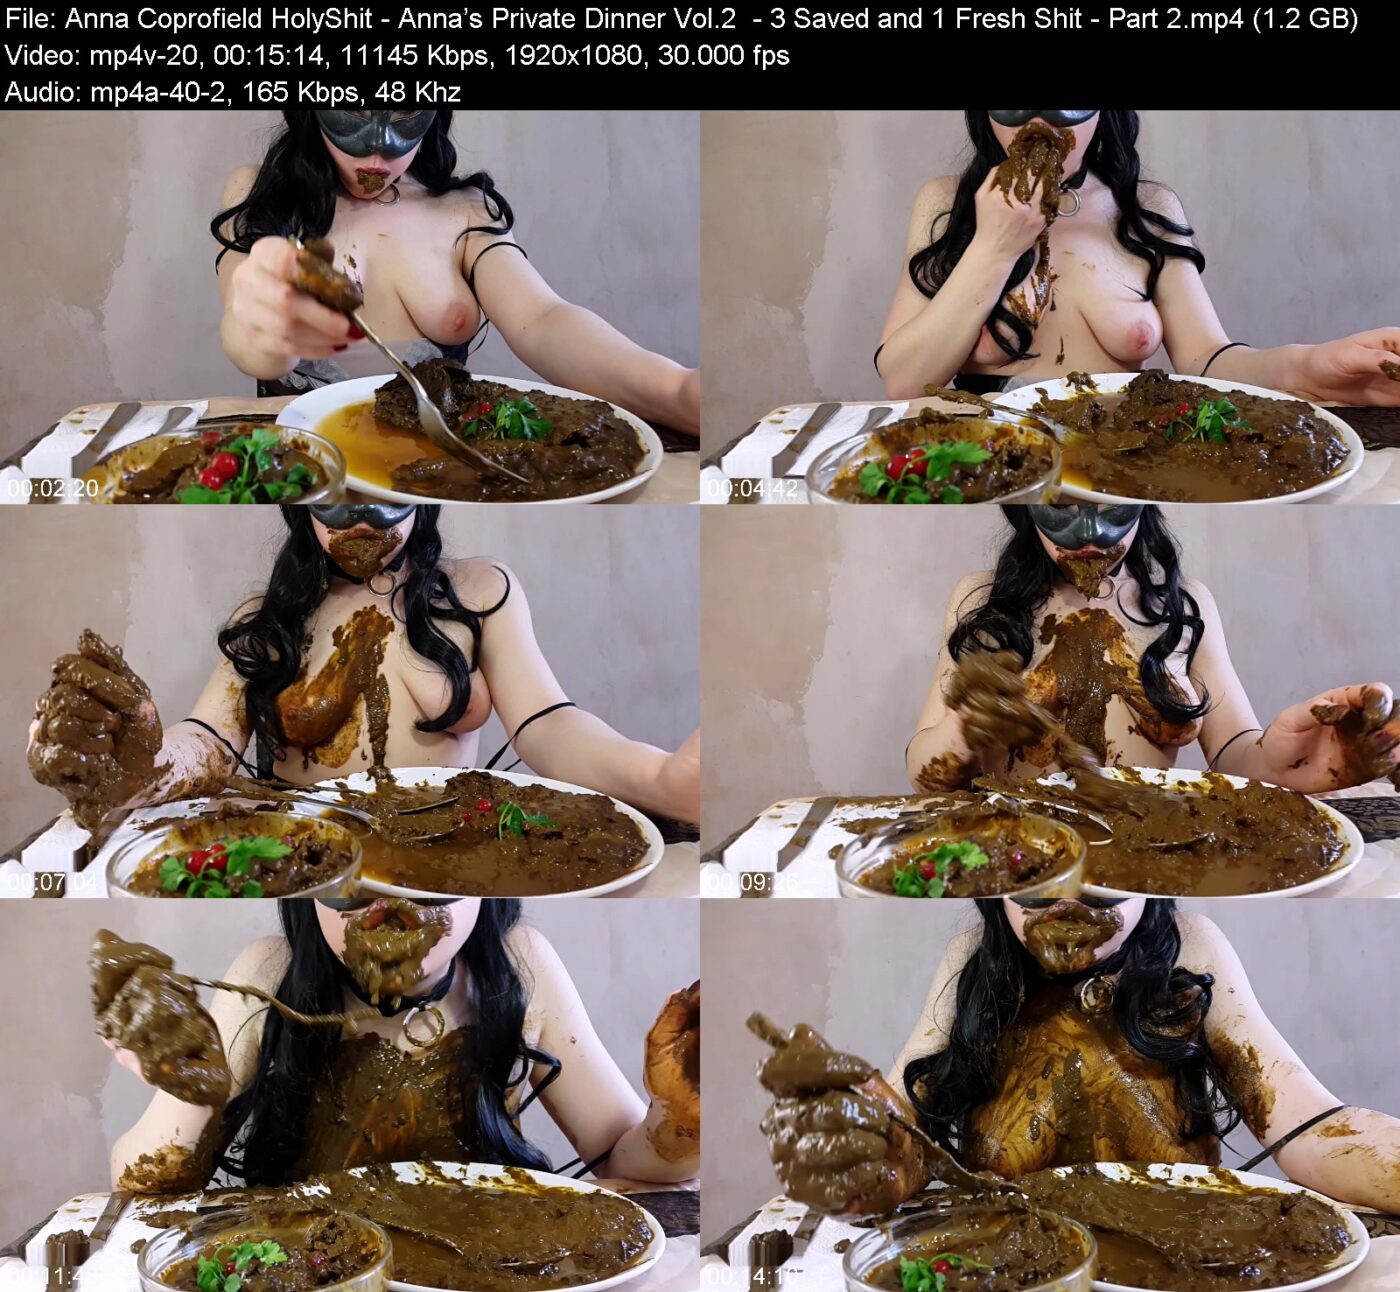 Anna Coprofield HolyShit - Anna's Private Dinner Vol.2  - 3 Saved and 1 Fresh Shit - Part 2